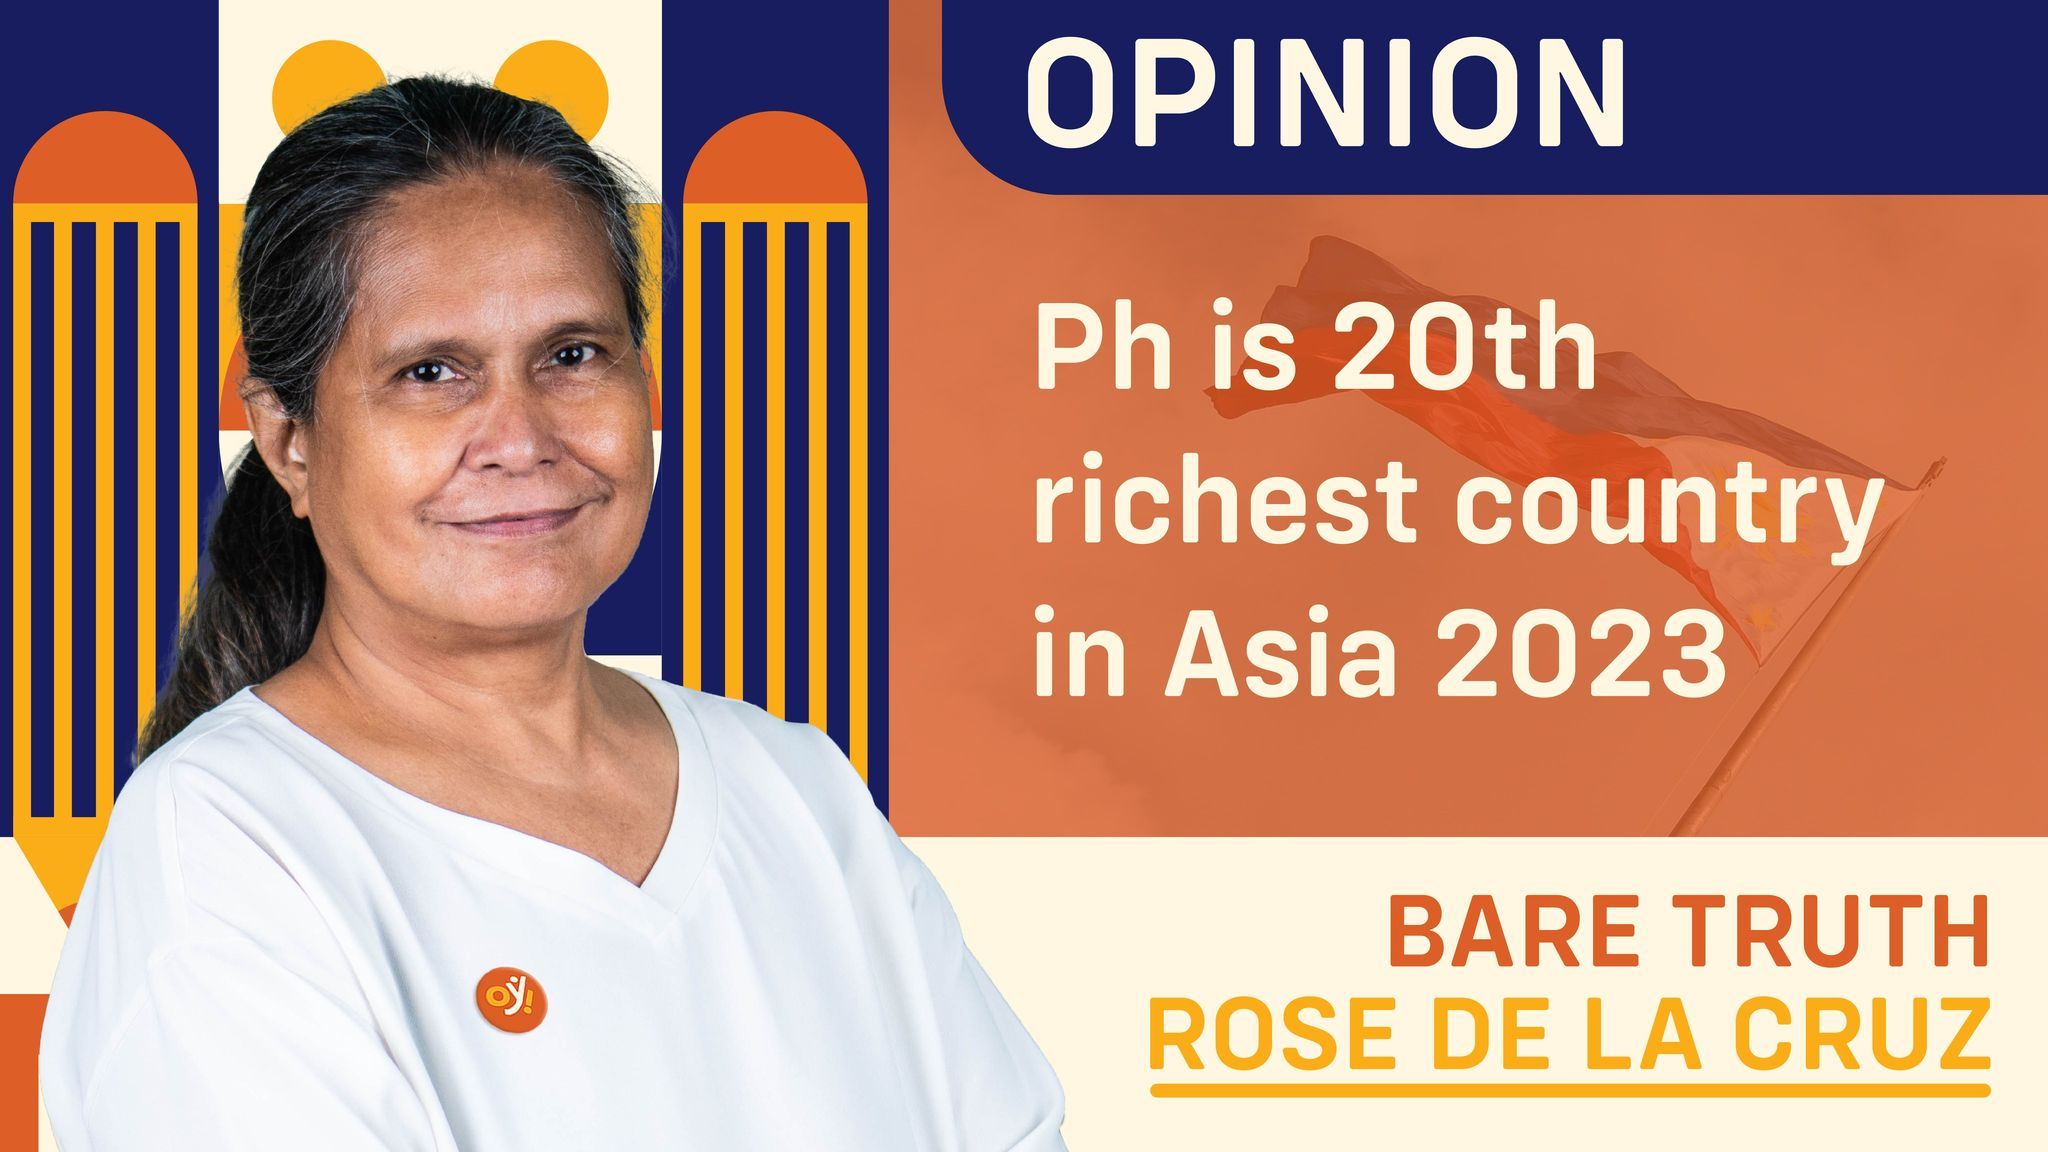 Ph is 20th richest country in Asia 2023